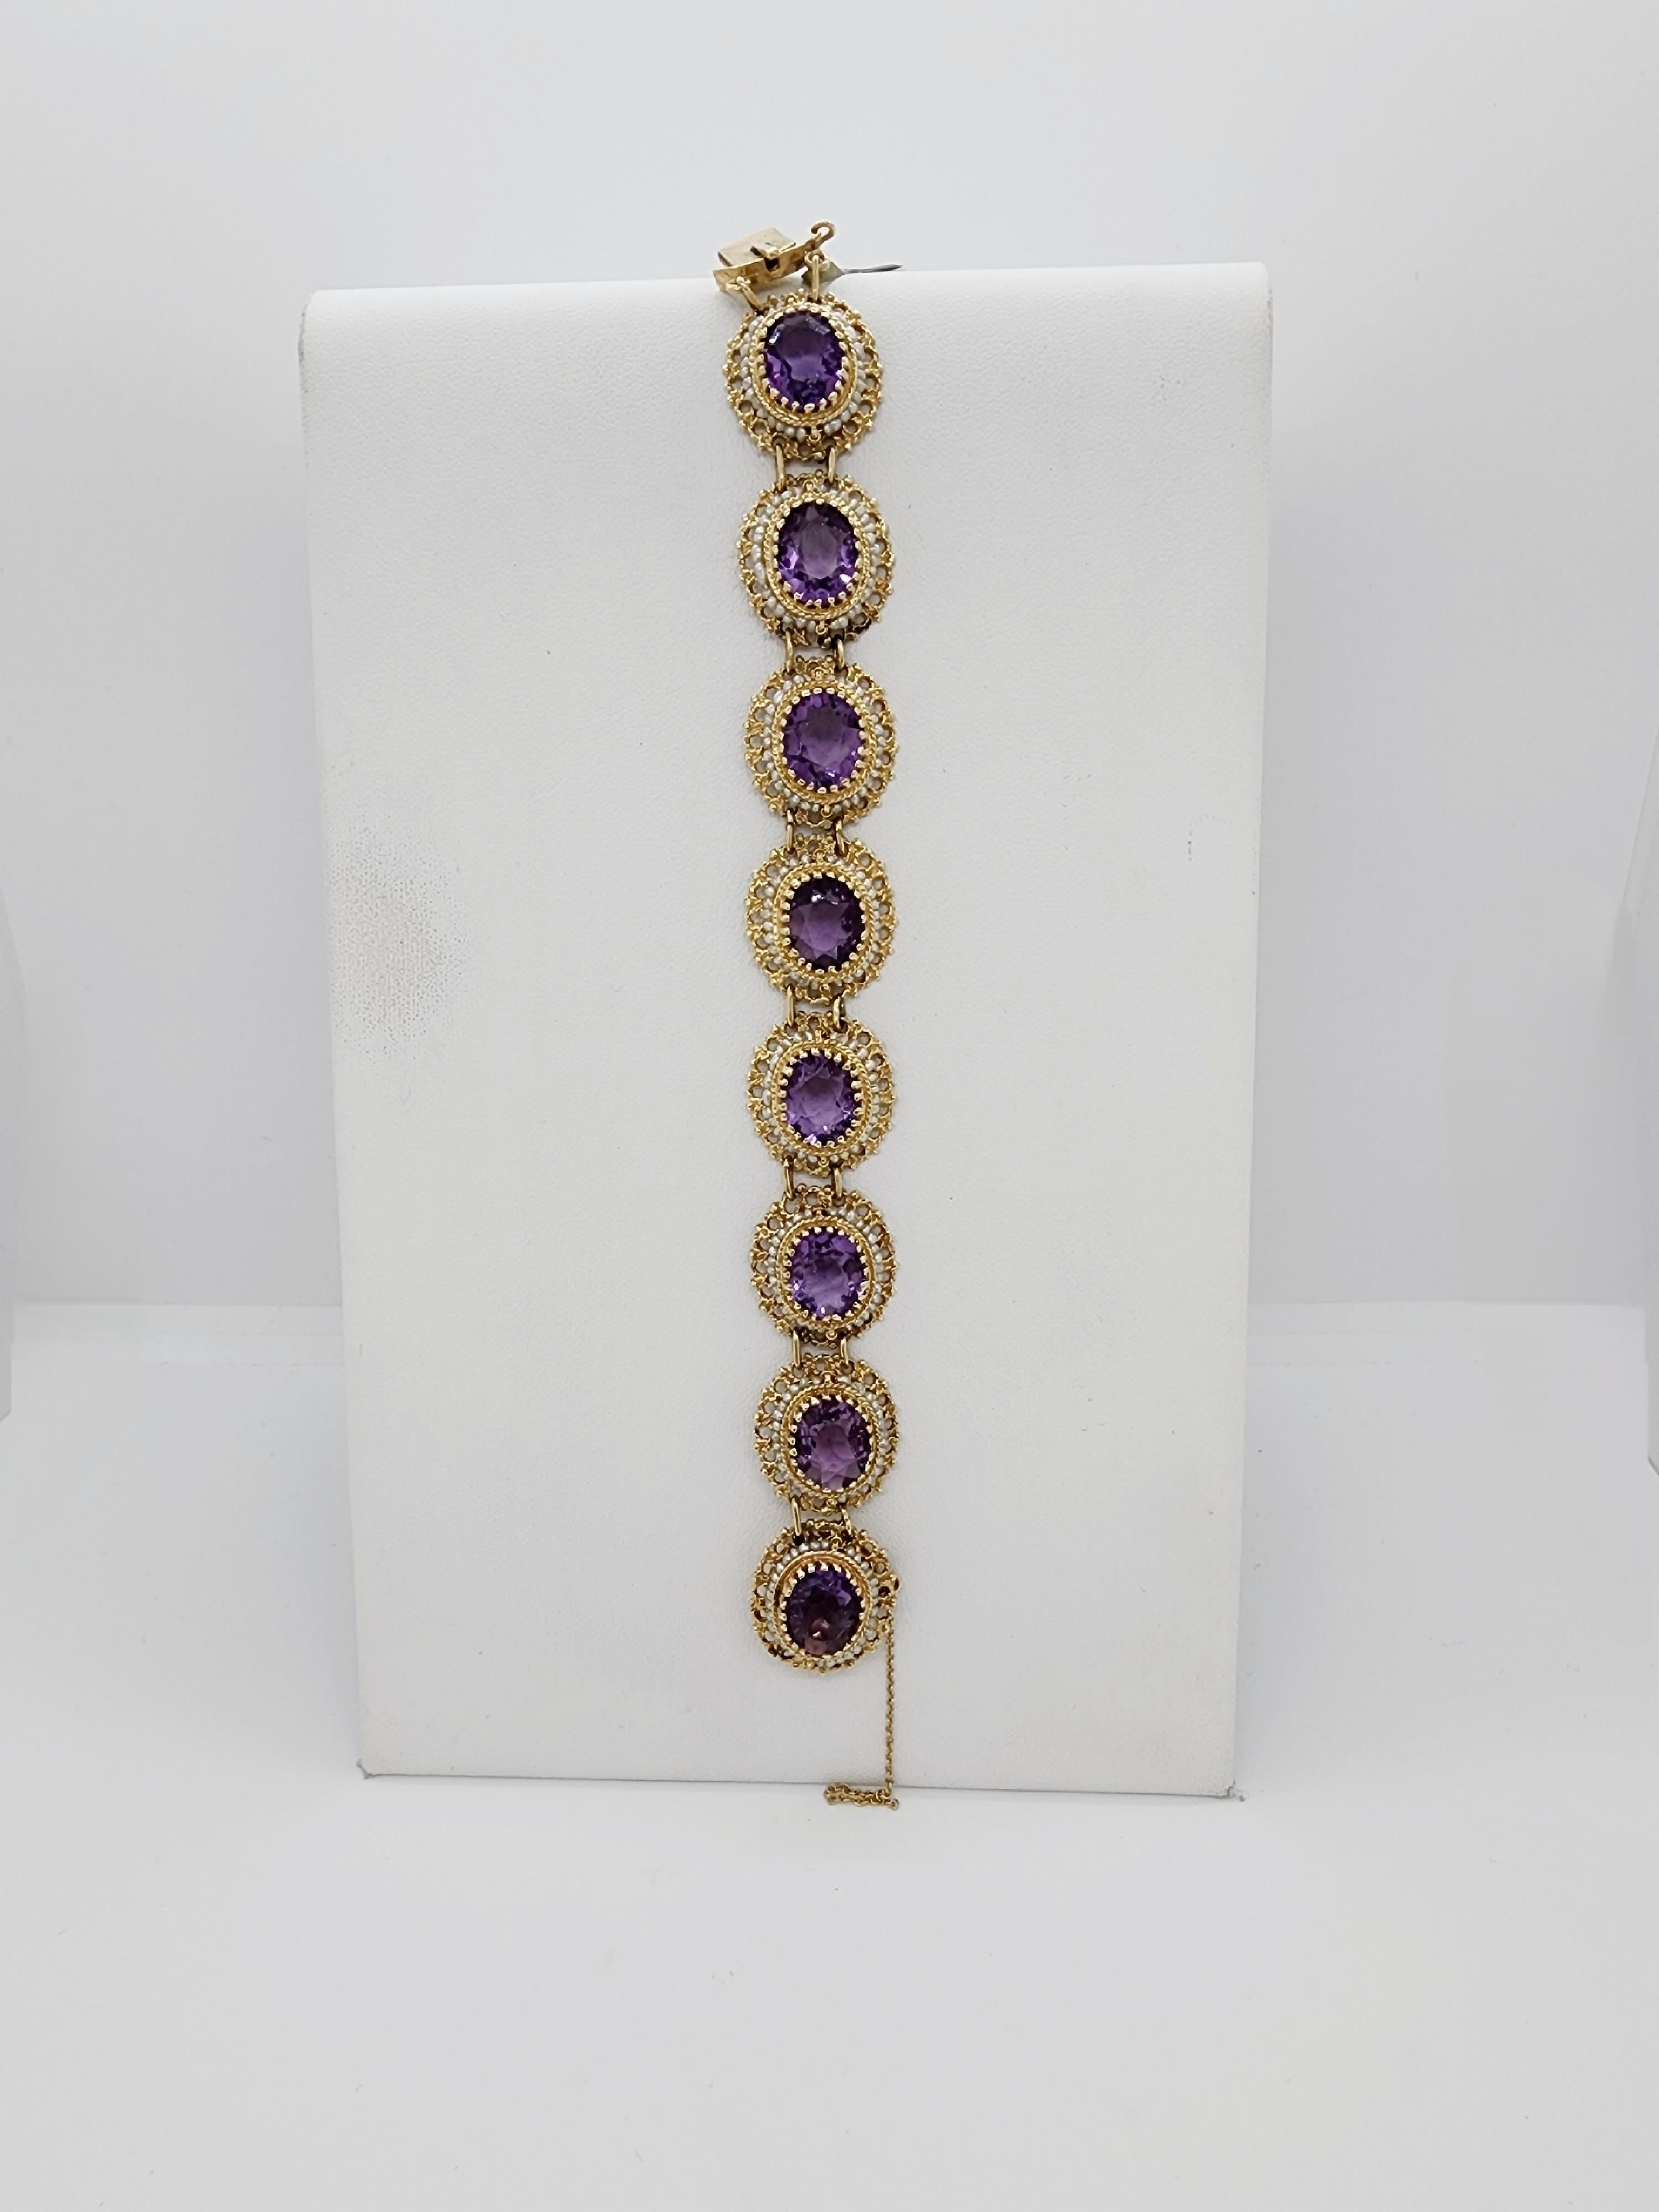 Amethyst and White Pearl Bracelet in 14k Yellow Gold For Sale 2